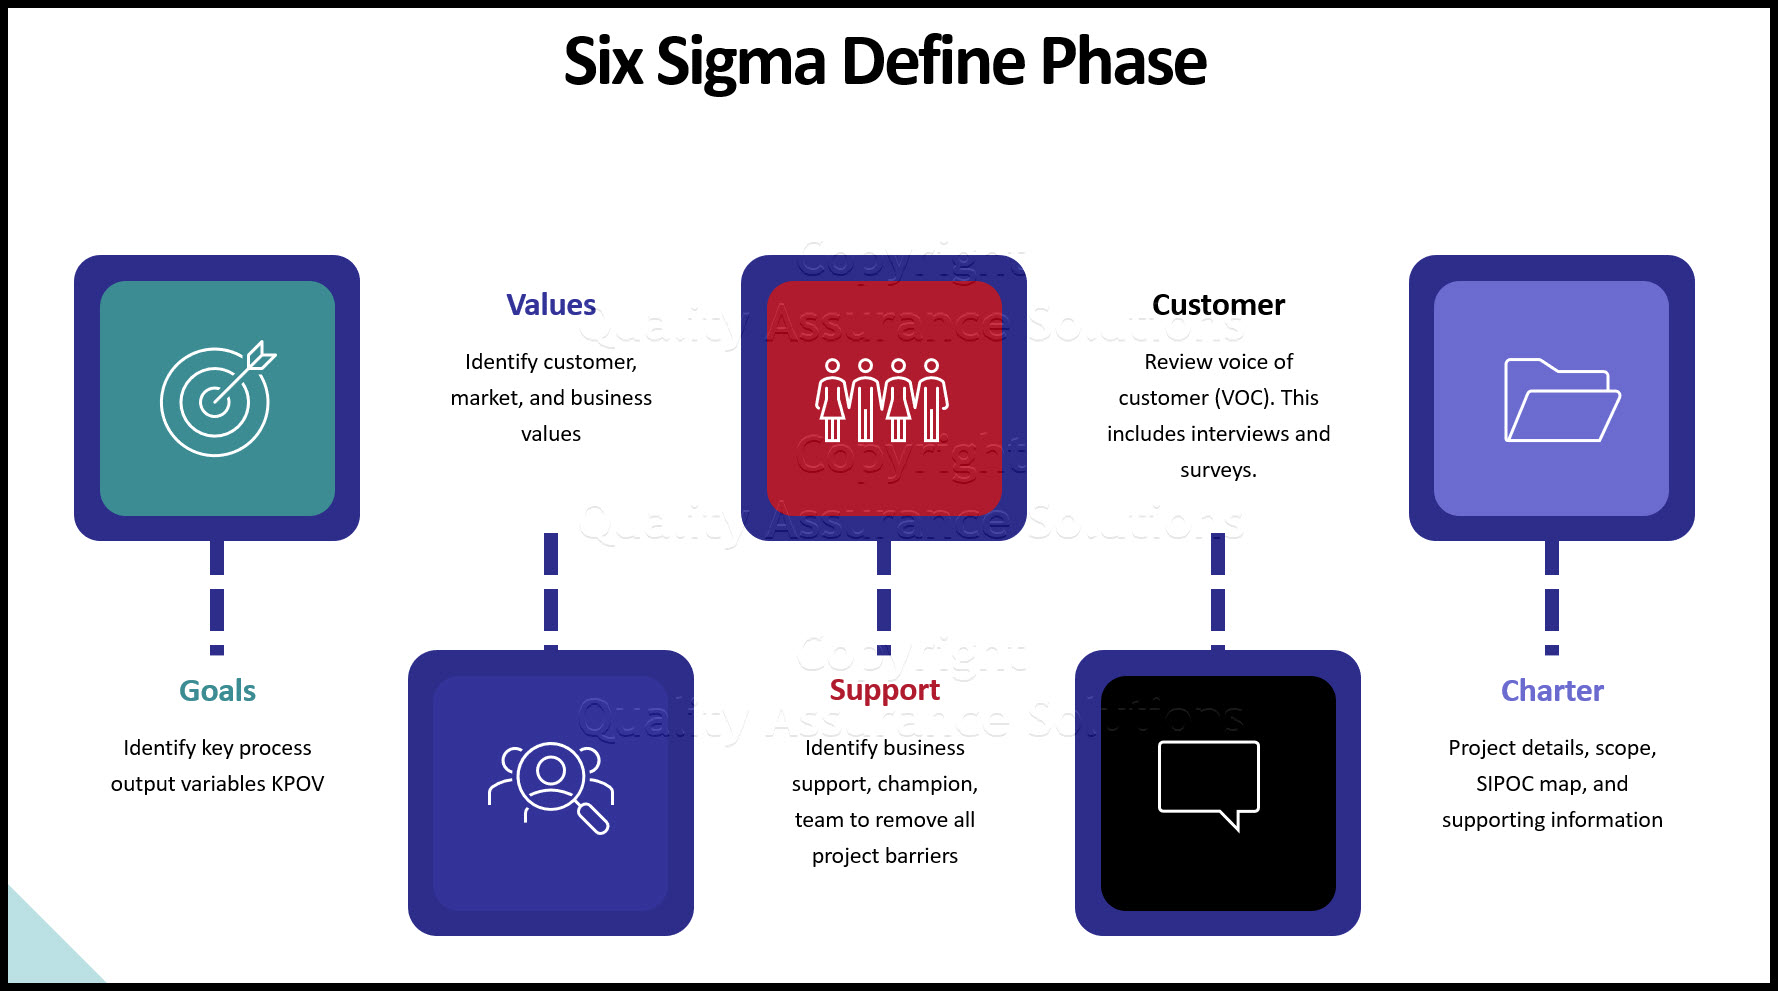 Learn the define six sigma phase which includes the charter, voice of the customer, values, goals, and support.